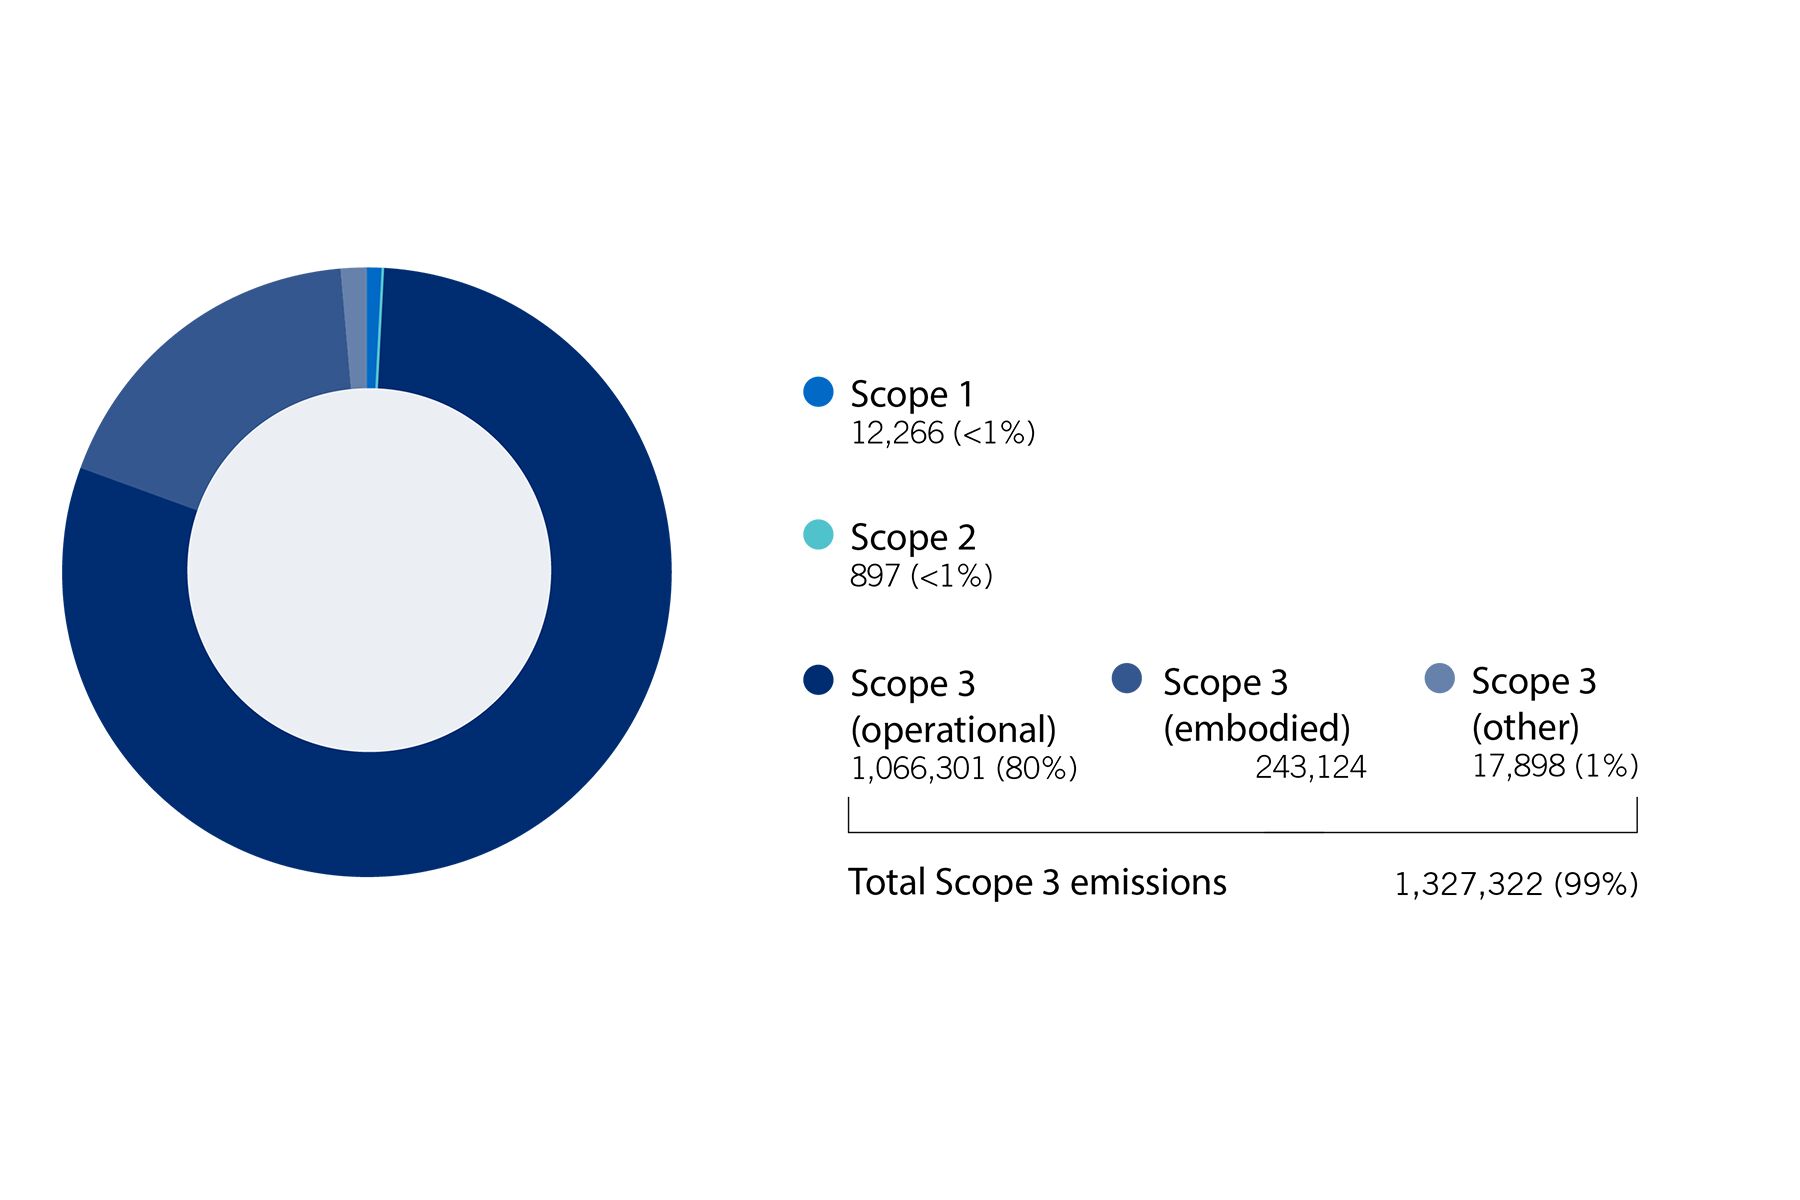 Circle chart with many shades of blue covering the chart compromising of different scope emissions with the total of 99% at the bottom.